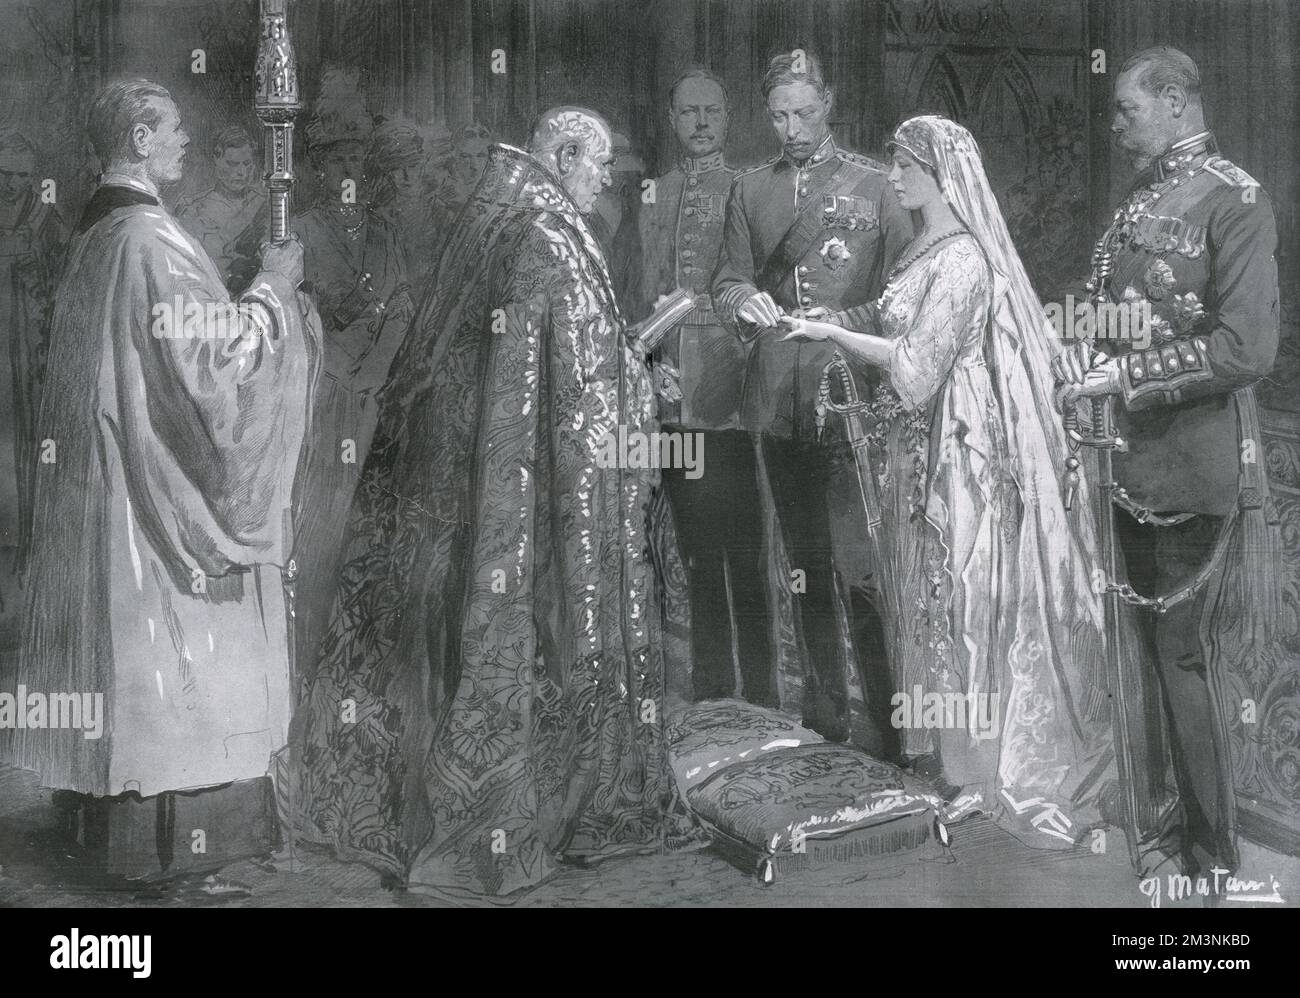 The marriage of Princess Mary, only daughter of King George V and Queen Mary, later Princess Royal and Countess of Harewood, to Henry, Viscount Lascelles, later 6th Earl of Harewood, in Westminster Abbey on 28th February 1922. Lord Lascelles places the ring on the Princess's finger in front of the Archbishop of Canterbury, Randall Davidson. George V stands on the right of the picture.     Date: 28th February 1922 Stock Photo